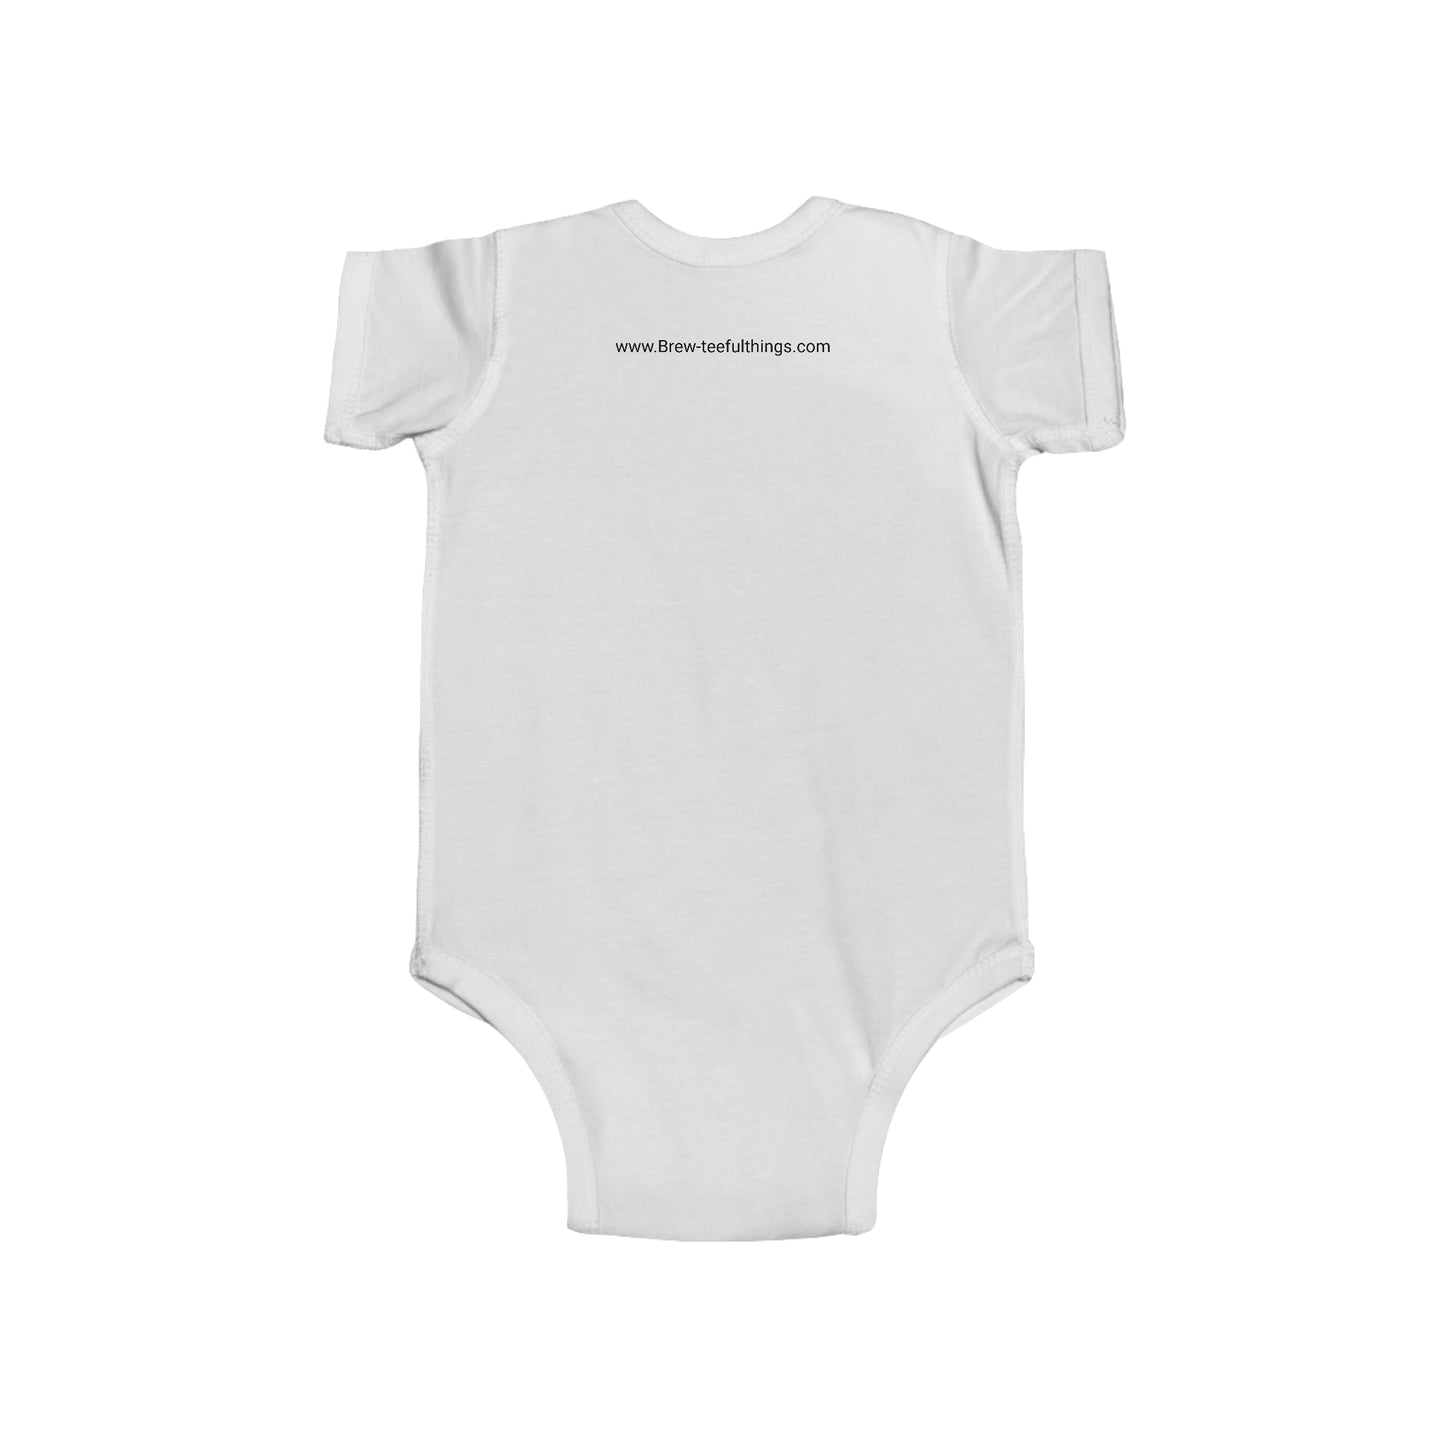 " I come in peace" Infant Fine Jersey Bodysuit